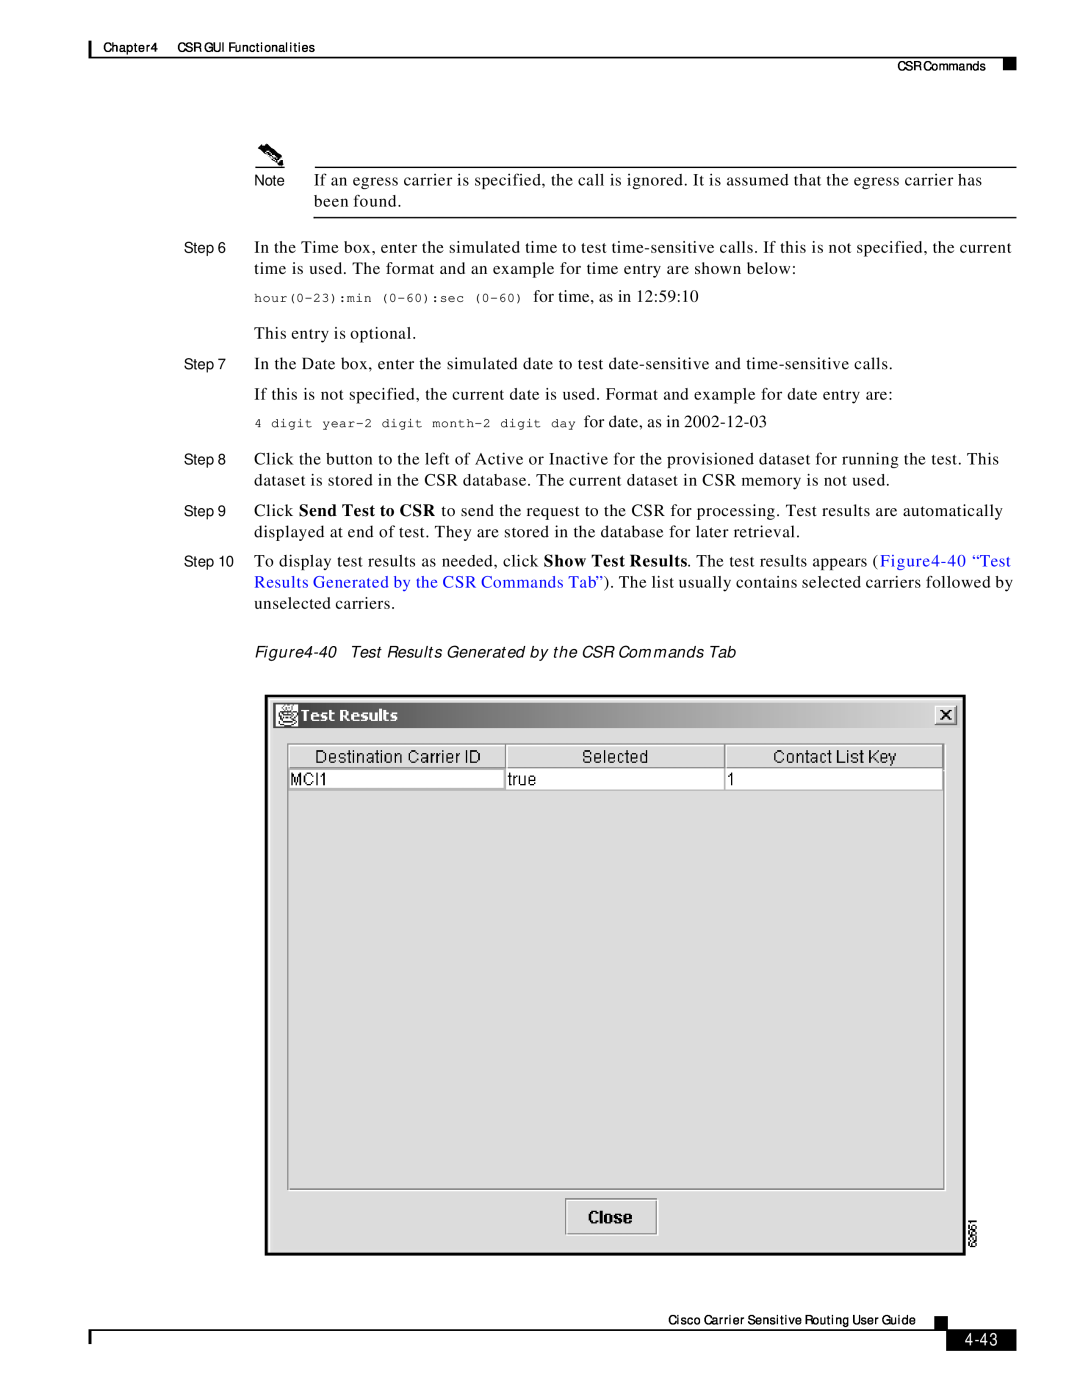 Cisco Systems Version 1.1 manual 4-43, This entry is optional 